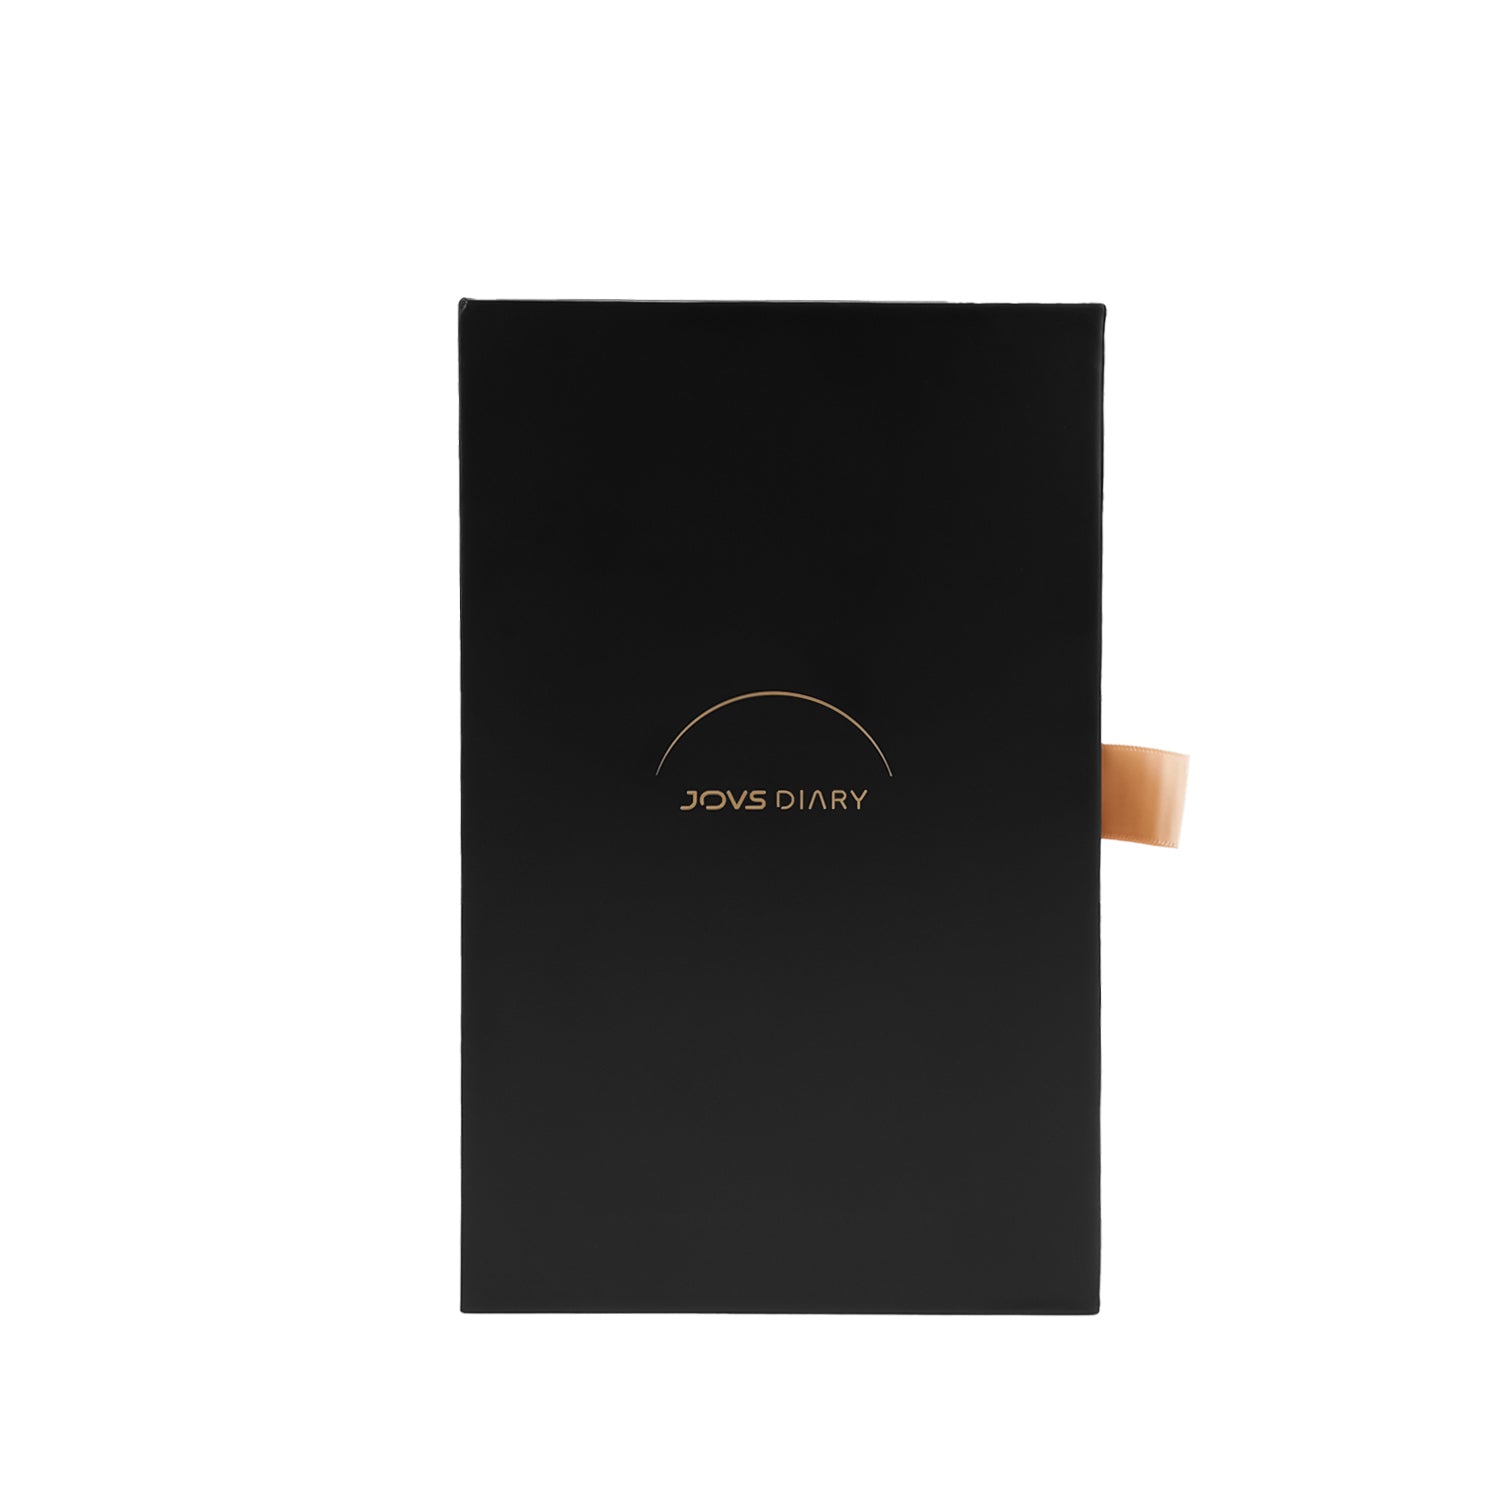 Elegant JOVS Diary Black Packaging for Skincare Products.